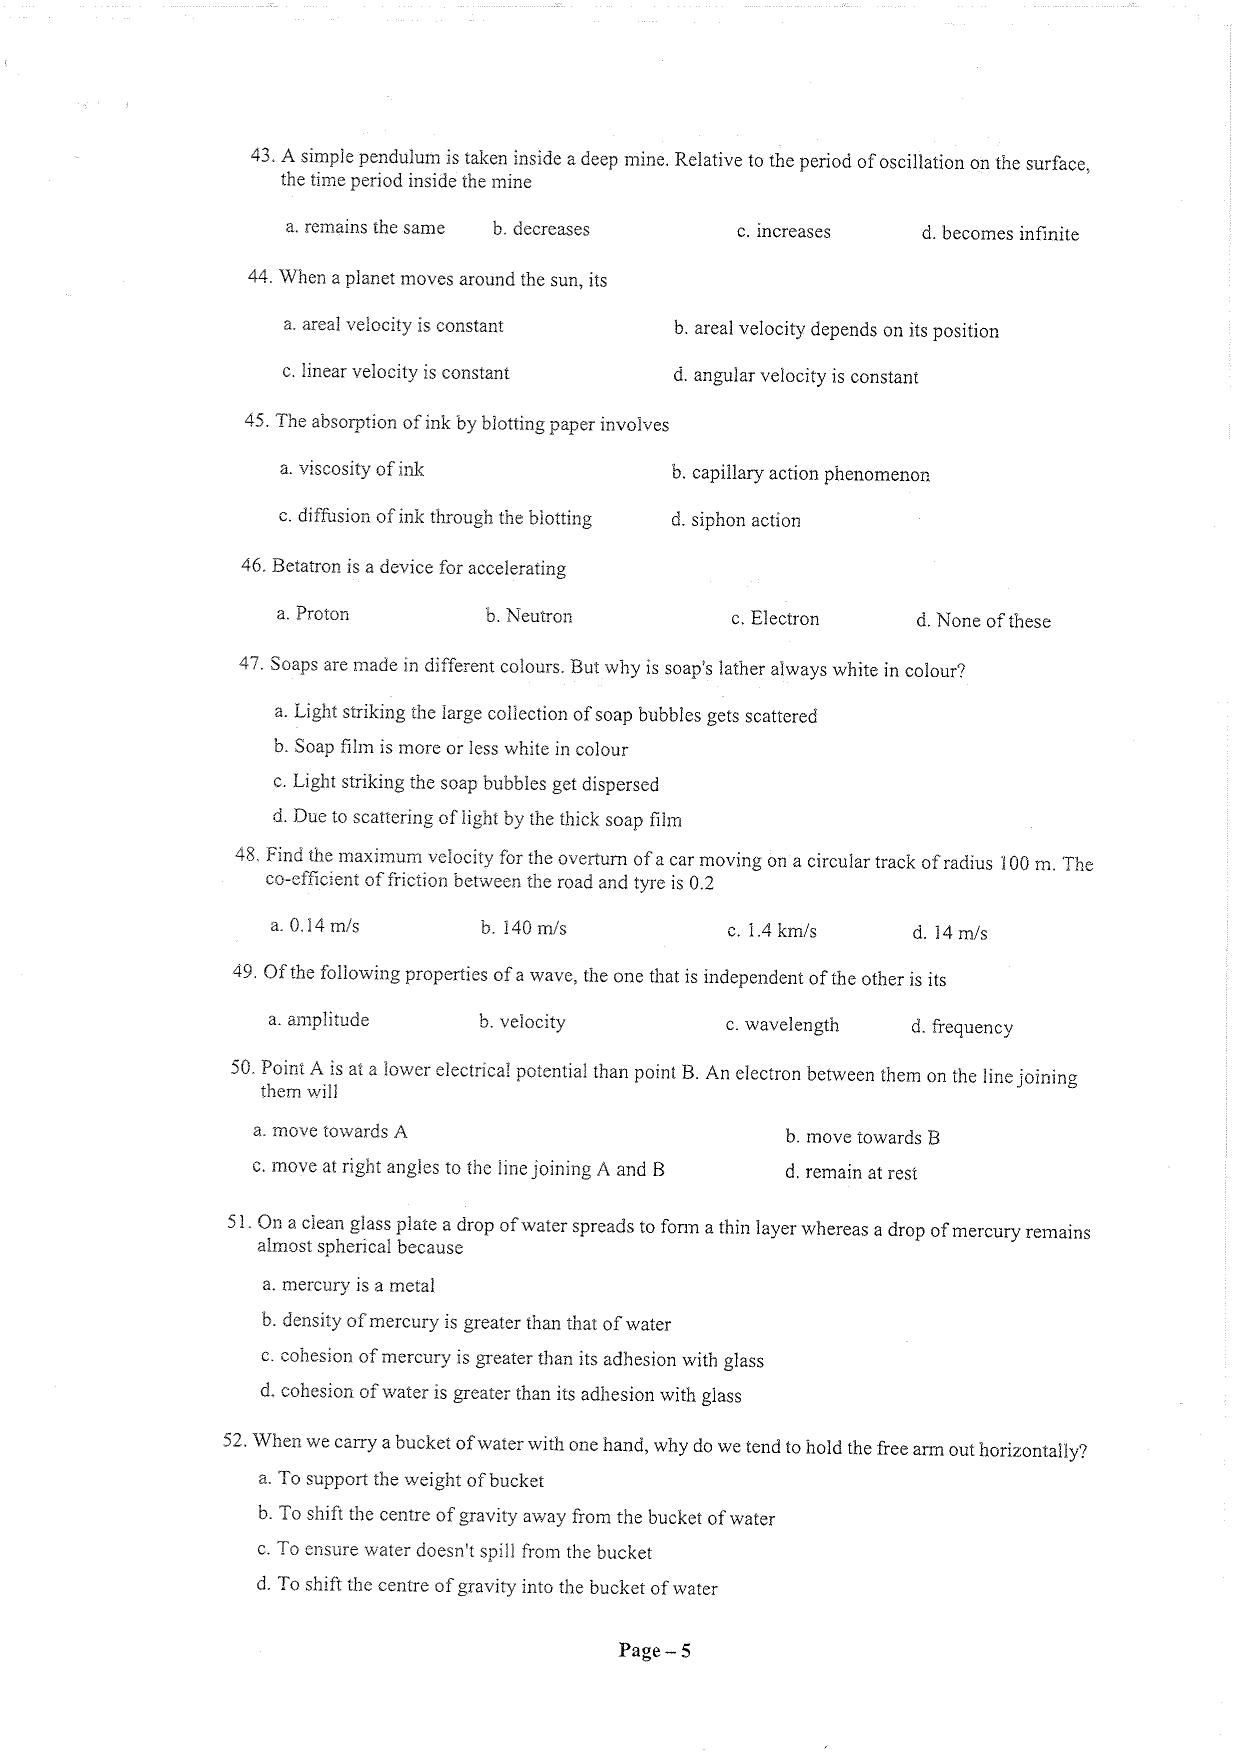 Question Paper of Education Assistant ‘A’ - Page 5